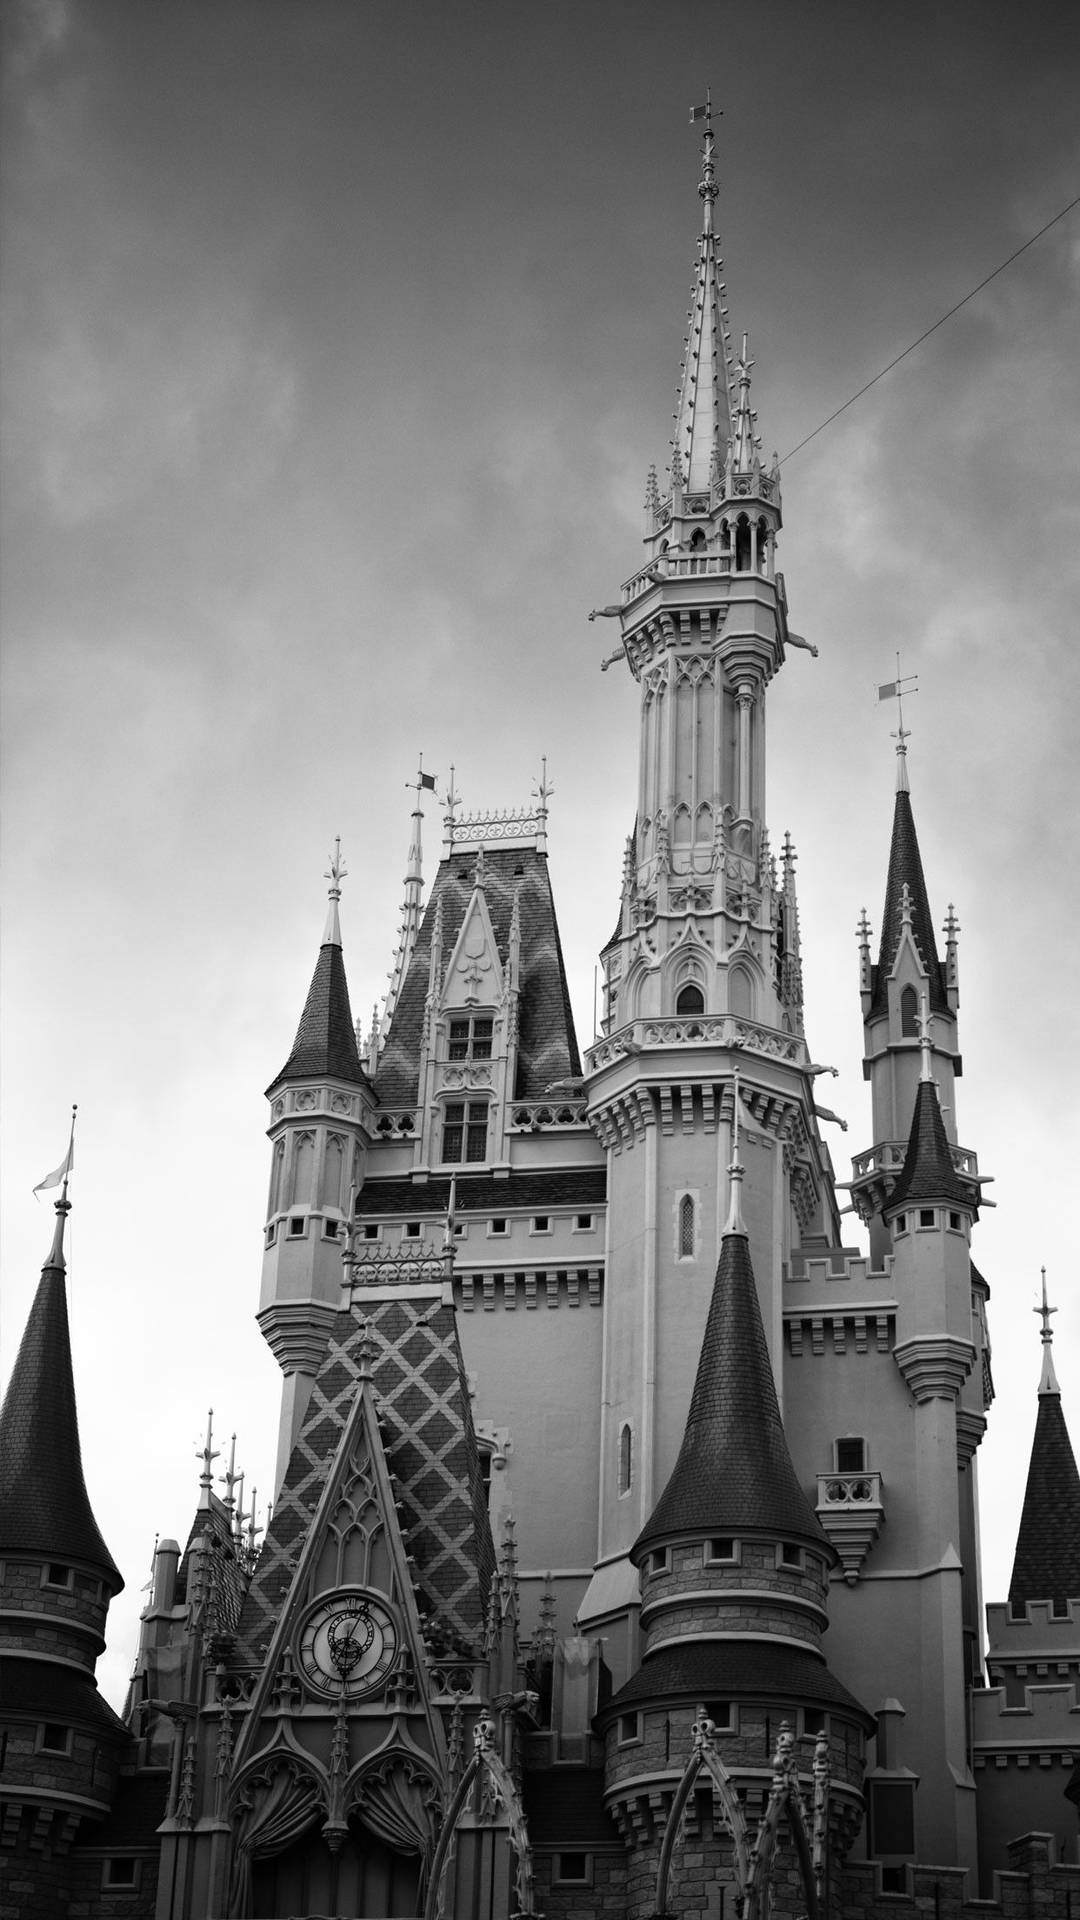 "A Magical Silhouette: Disney Castle in Black and White" Wallpaper